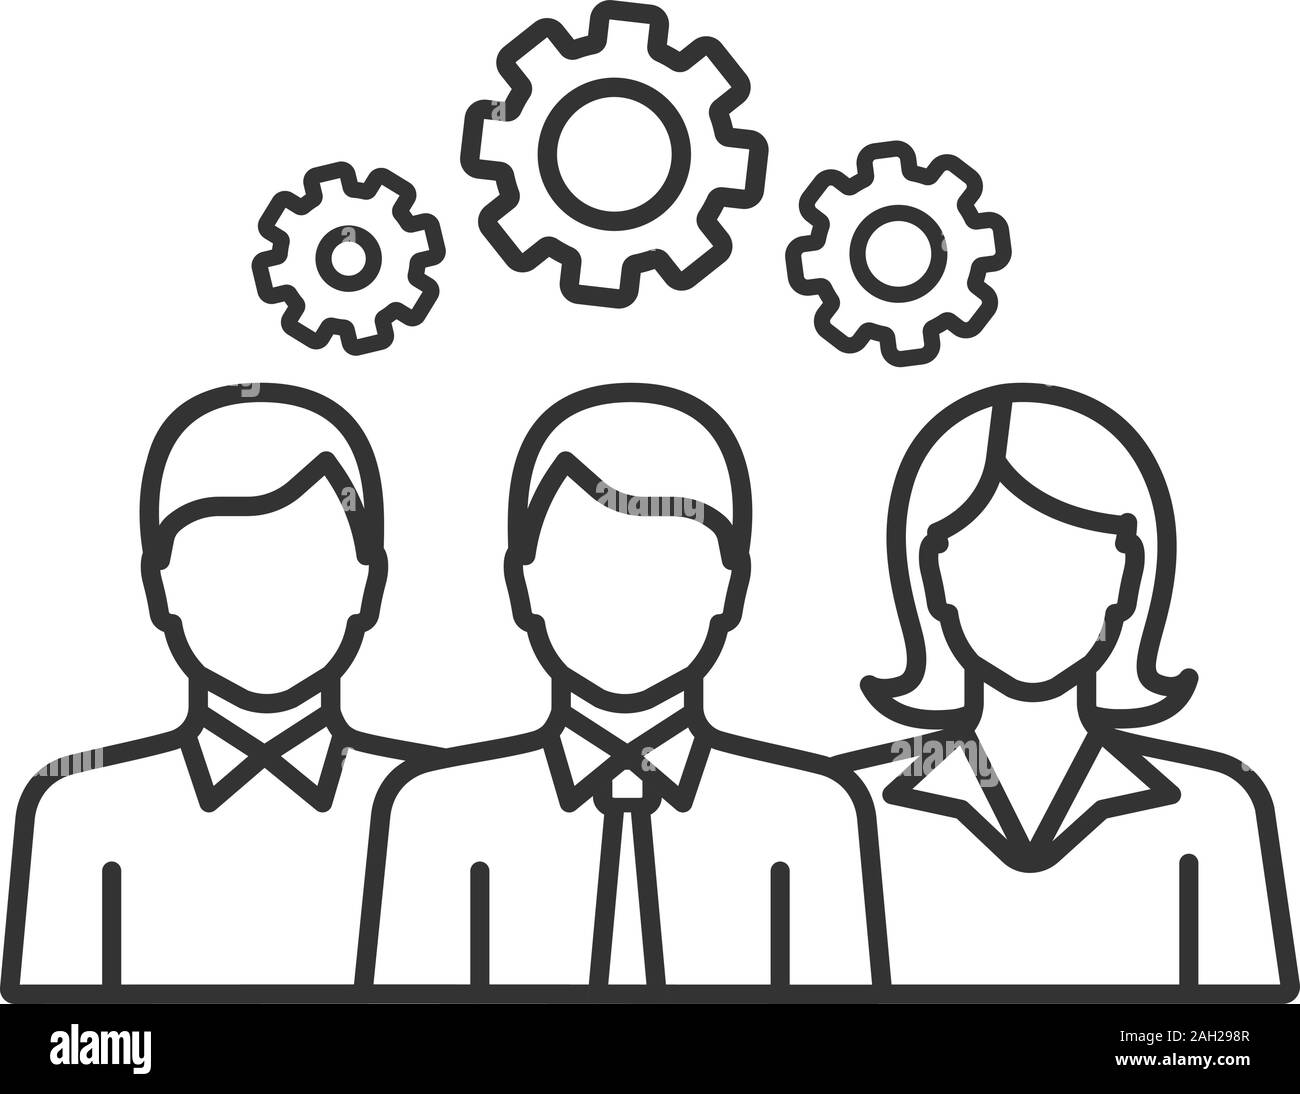 Team leader line icon people business Royalty Free Vector